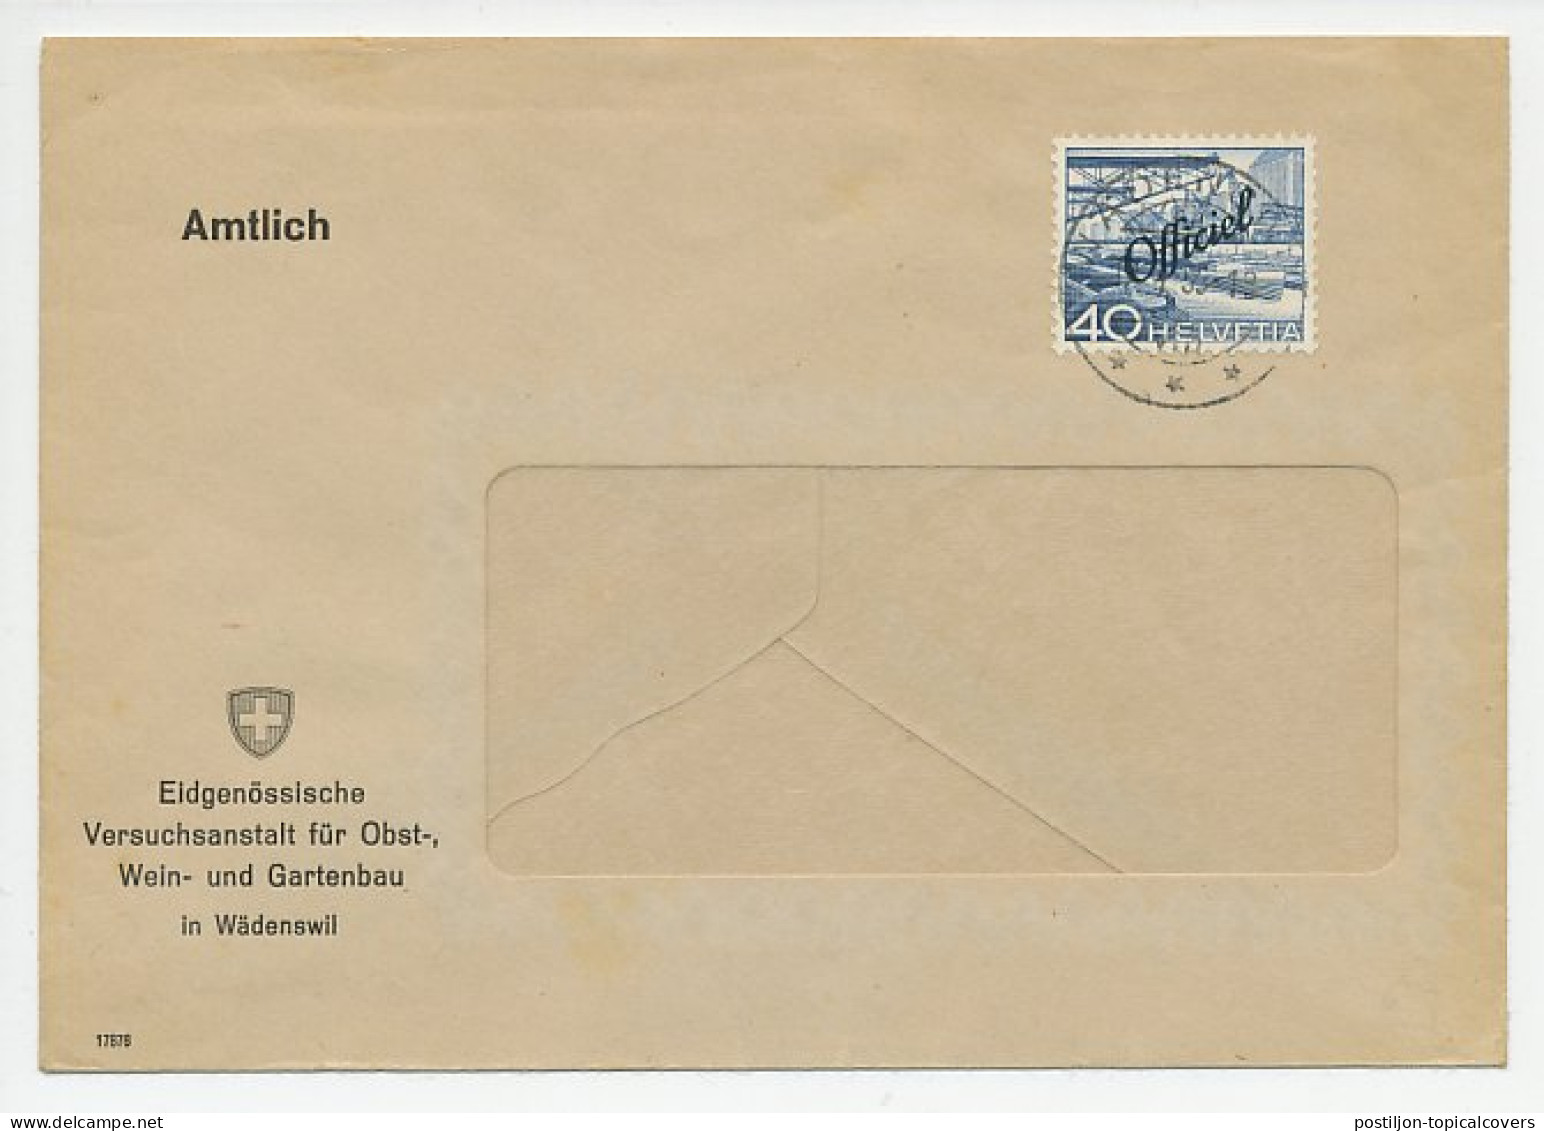 Official Service Cover / Postmark Switzerland 1955 Federal Research Institute For Fruit, Wine And Horticulture - Wijn & Sterke Drank